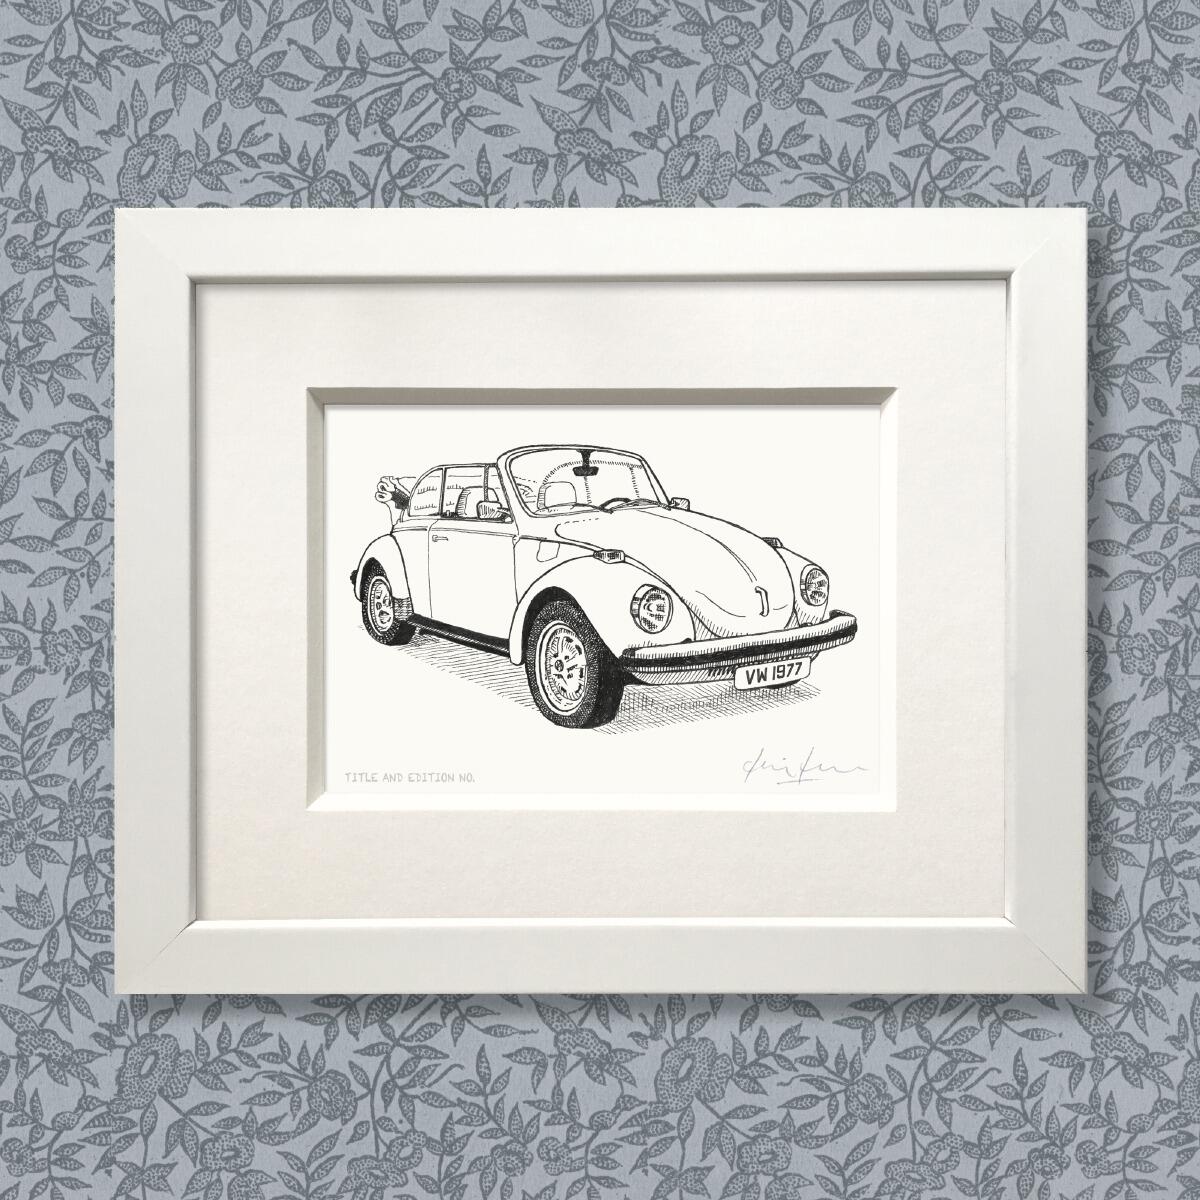 Limited edition print from pen and ink drawing of a 1977 soft-top VW Beetle in white frame